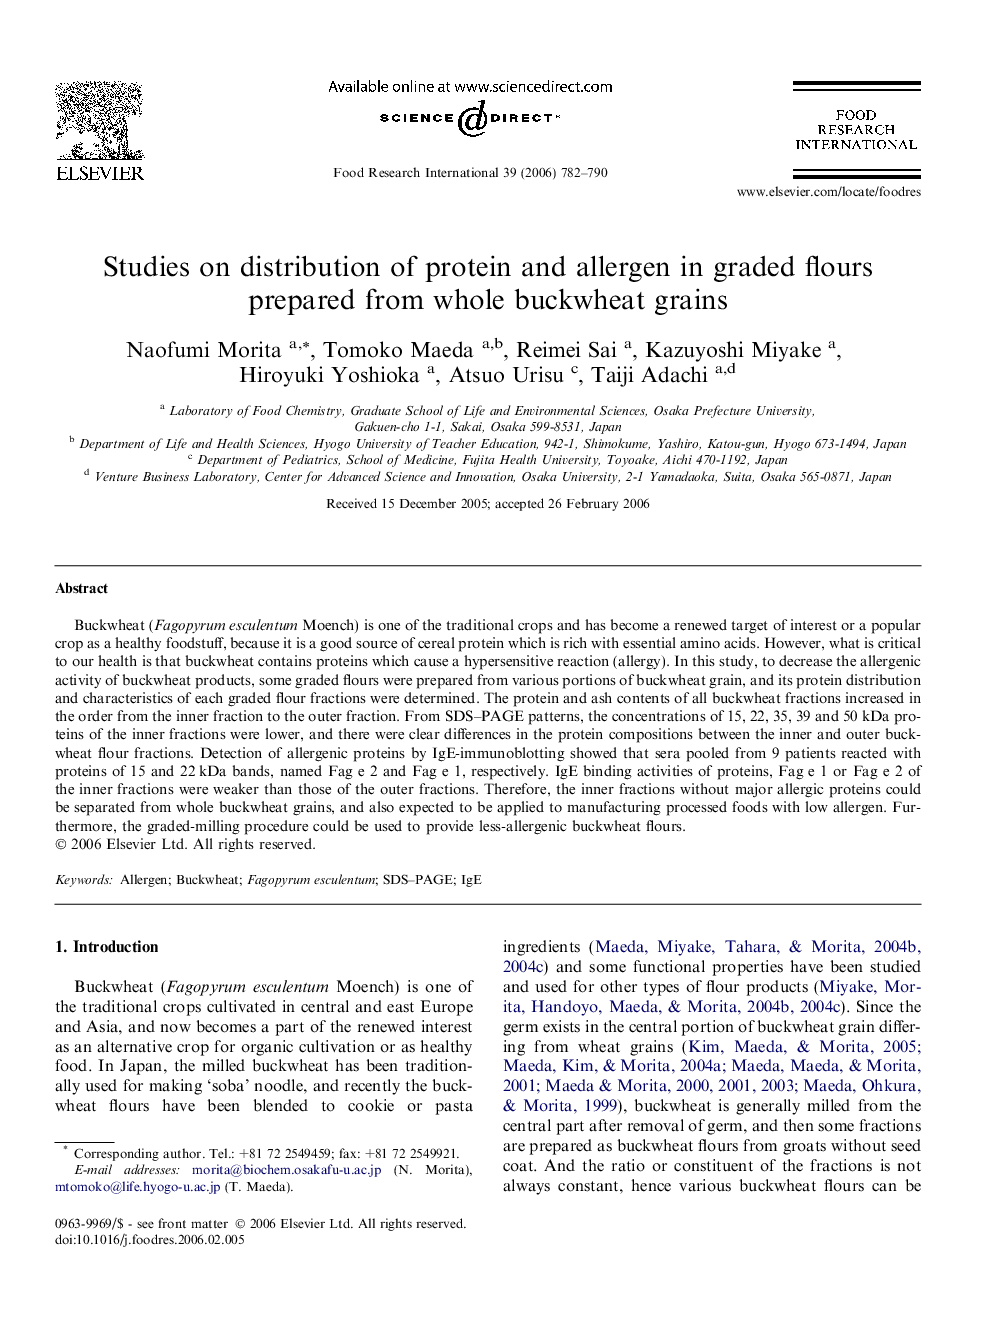 Studies on distribution of protein and allergen in graded flours prepared from whole buckwheat grains